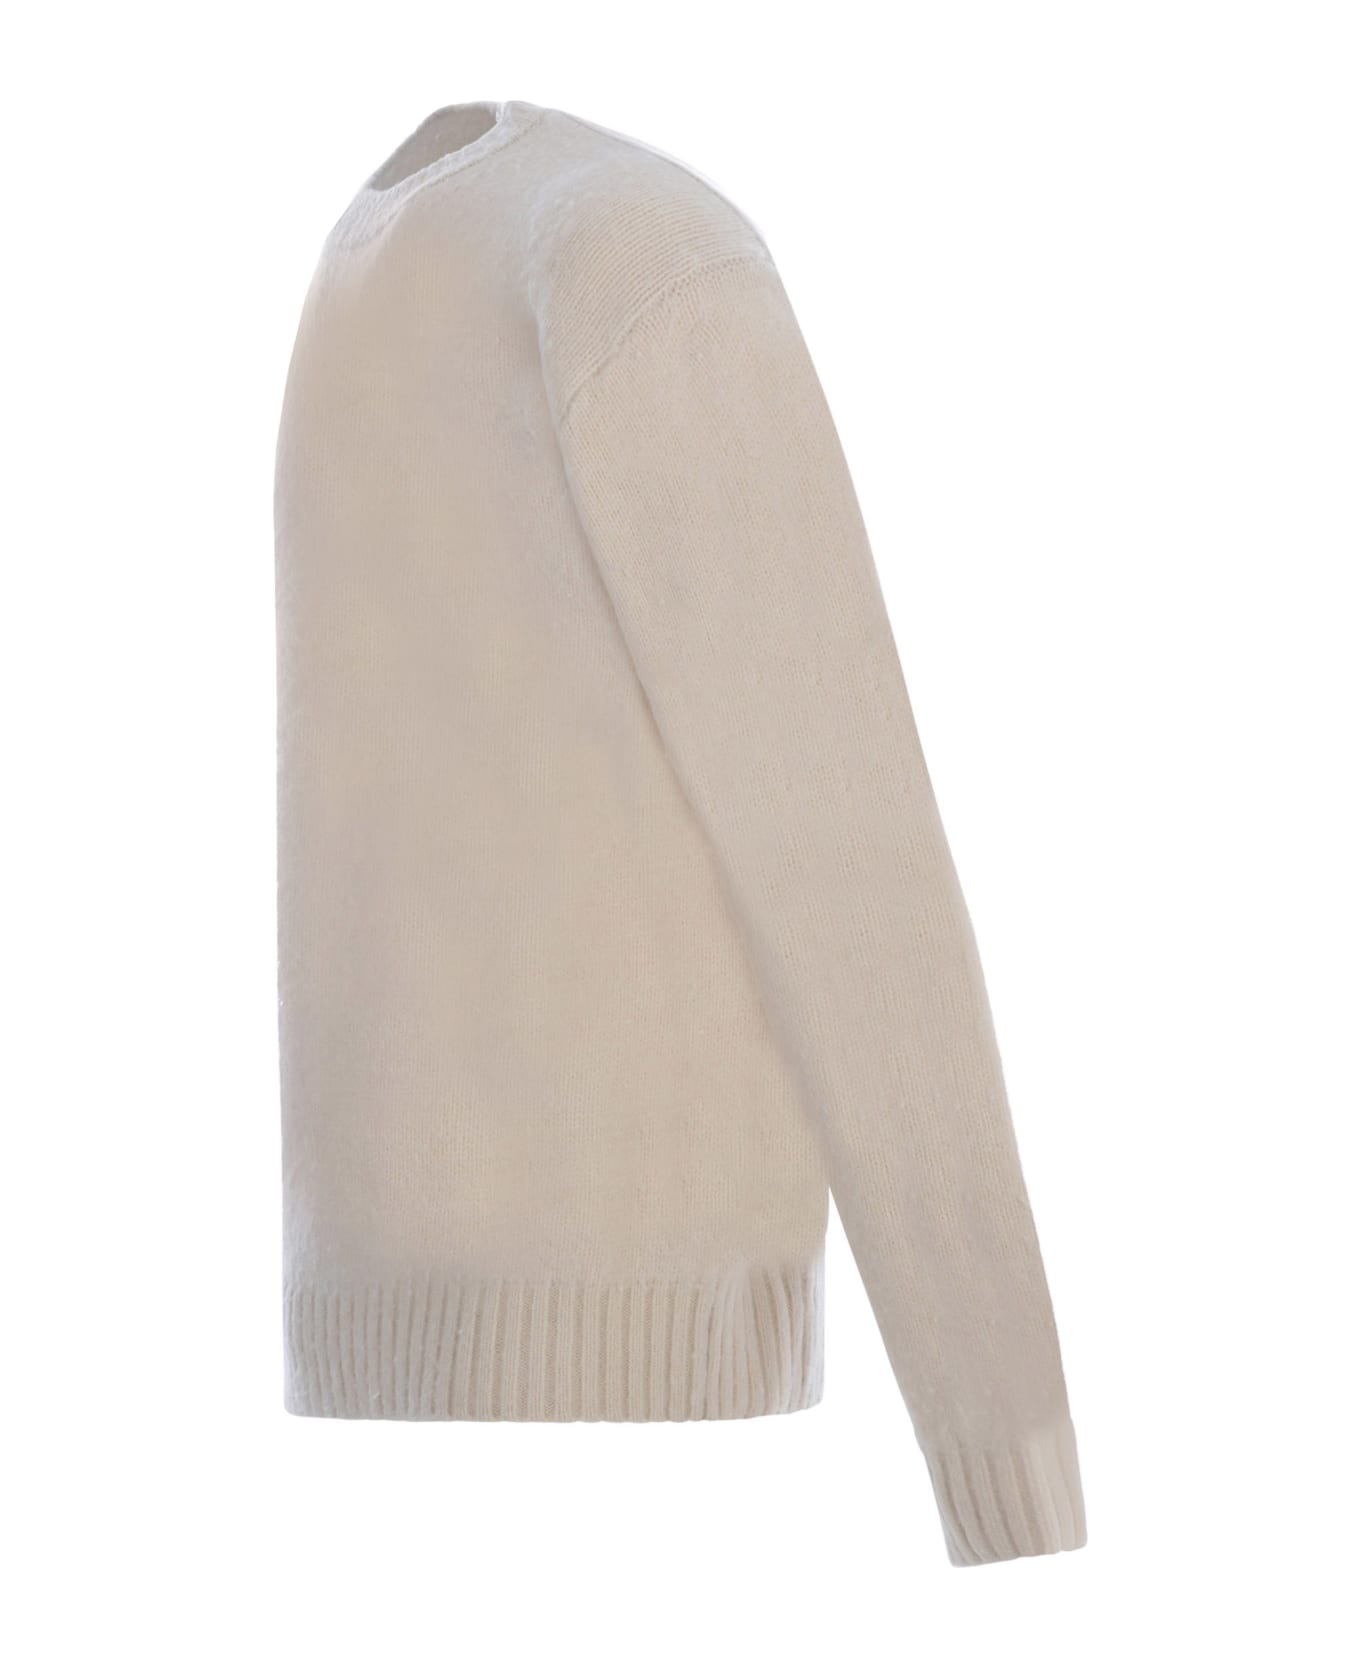 Axel Arigato Sweater Axel Arigato "clay" In Wool And Cashmere Blend - Beige chiaro